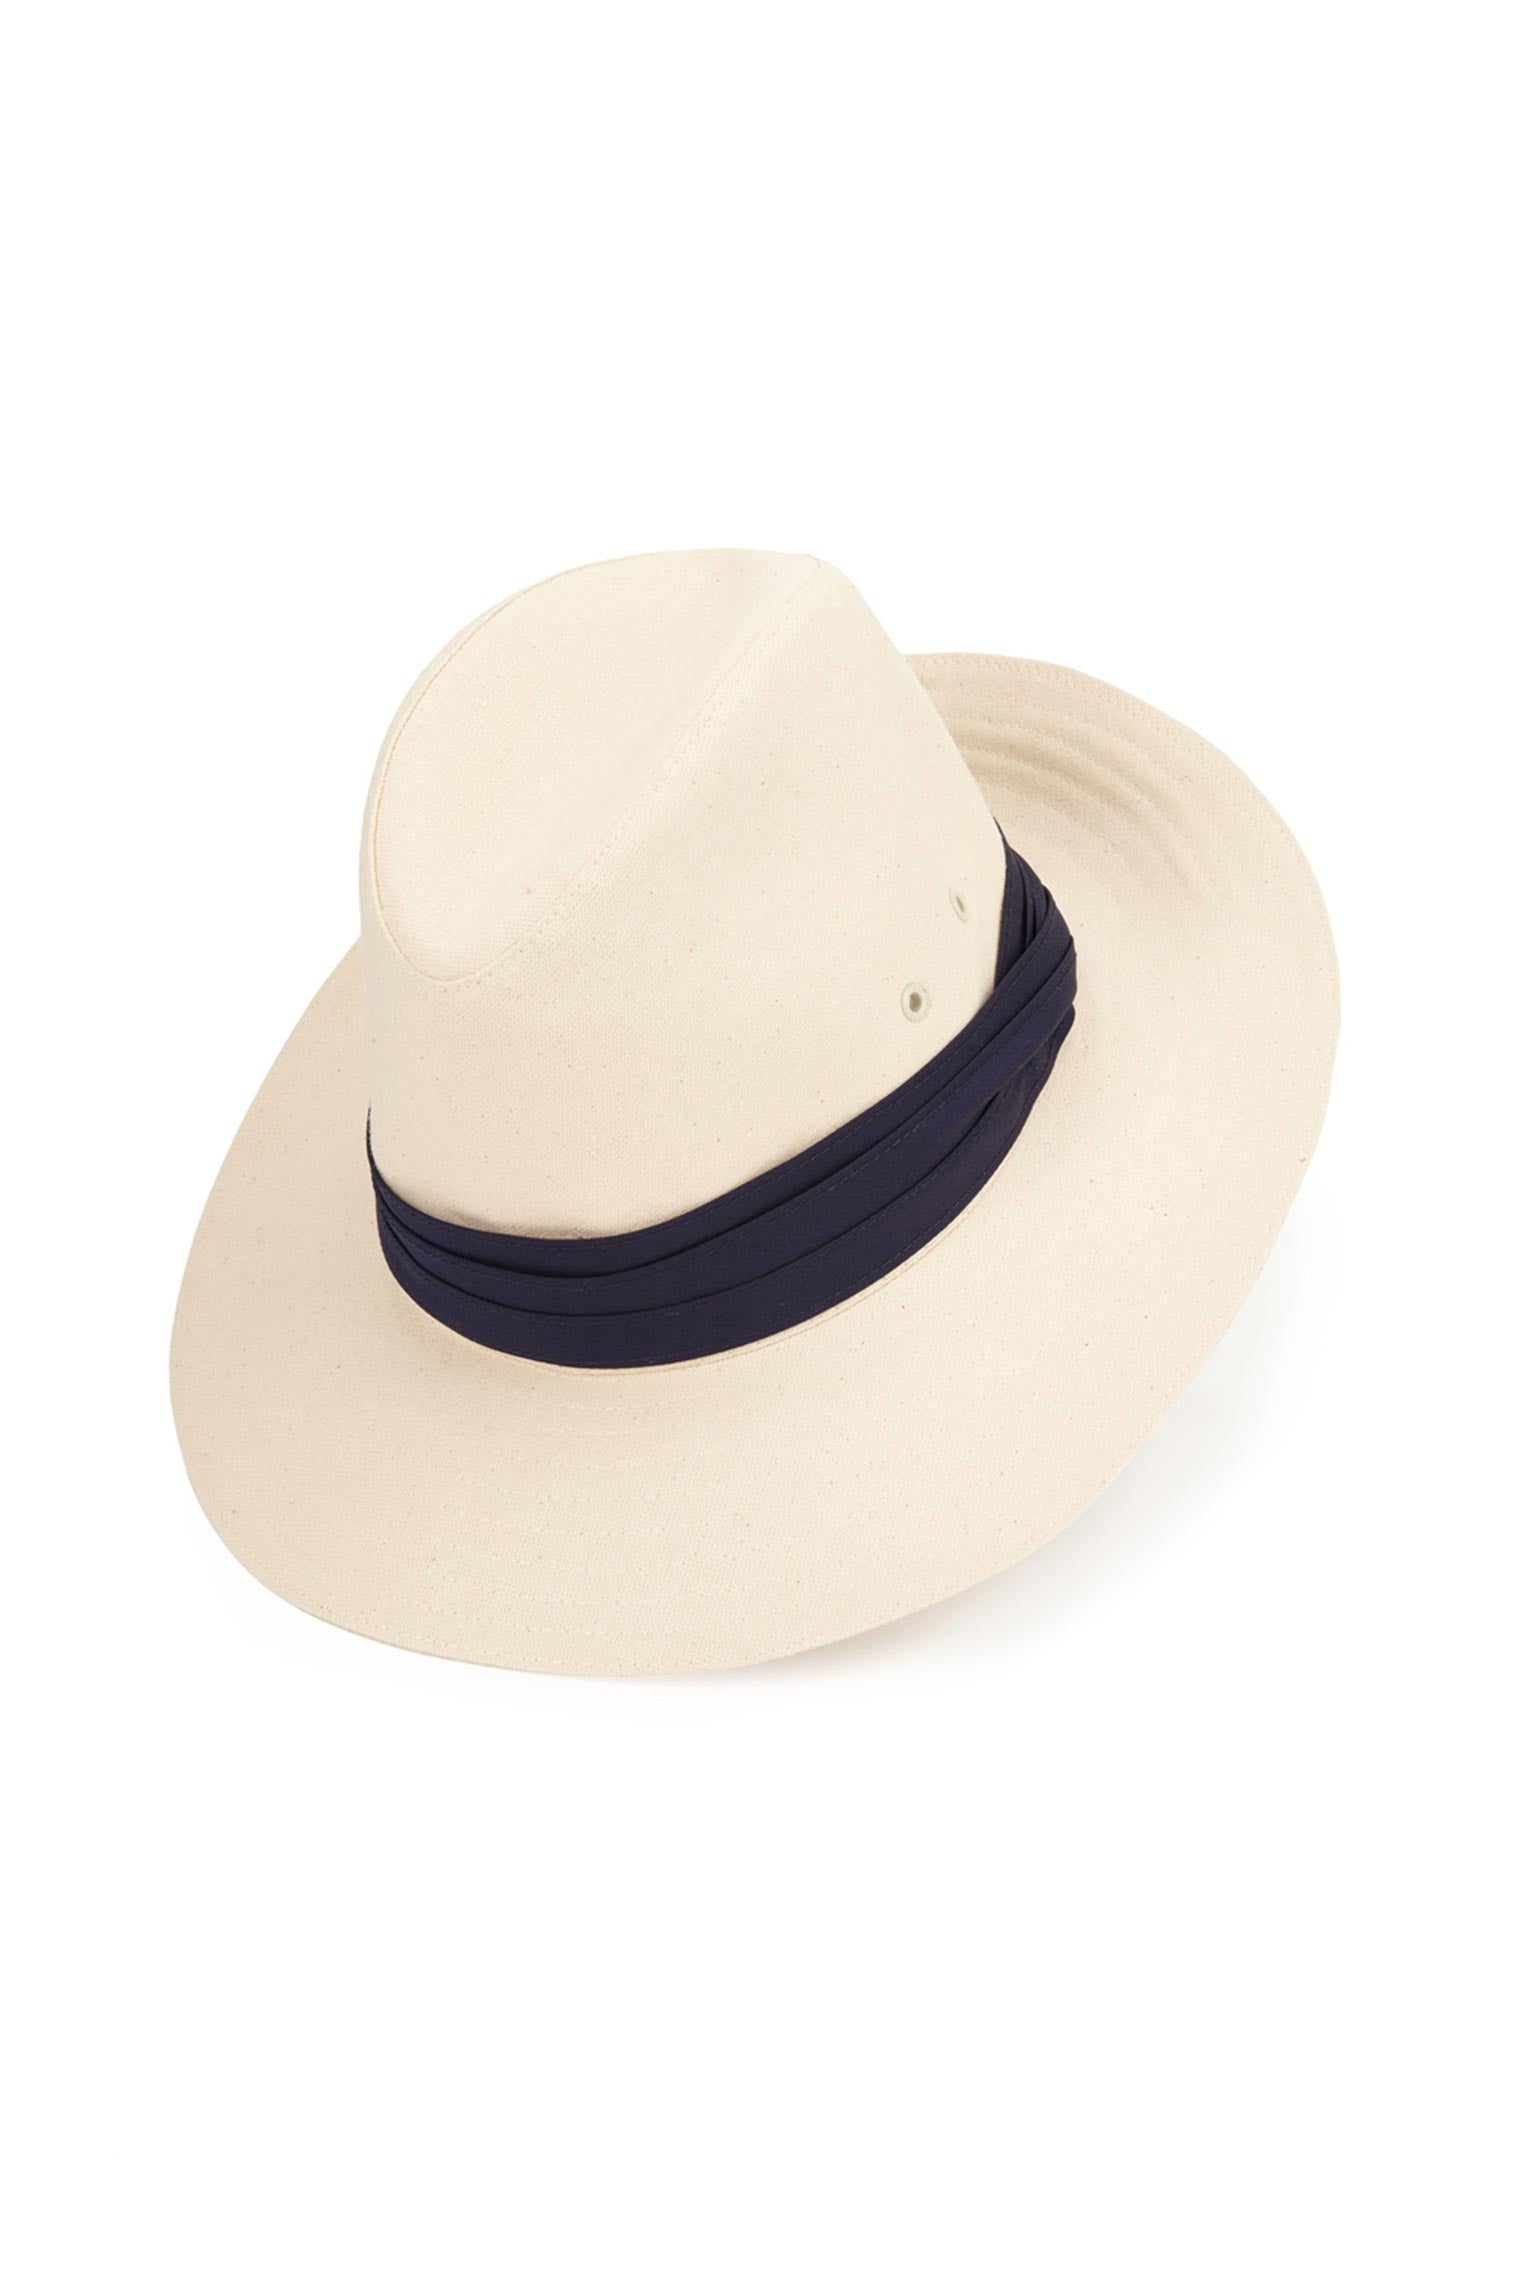 Namibia Calico Fedora - Hats for Oval Face Shapes - Lock & Co. Hatters London UK